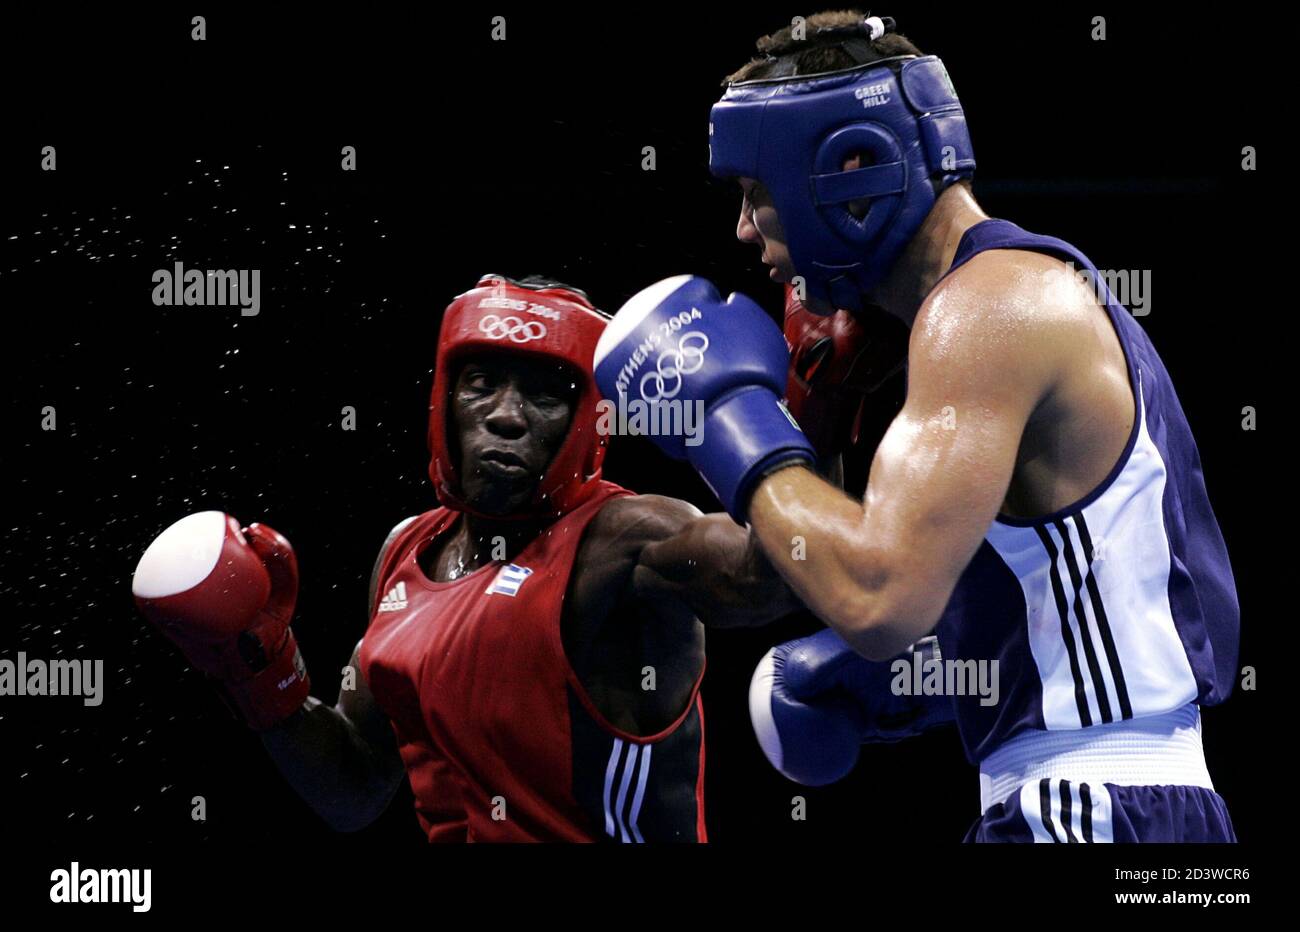 Yordani Despaigne Herrera of Cuba (L) lands a punch on Karoly Balzsay of Hungary during their round of 16 middleweight bout at the Athens 2004 Olympic Summer Games August 21, 2004. Despaigne Herrera won the fight and qualified for the quarter finals. Stock Photo